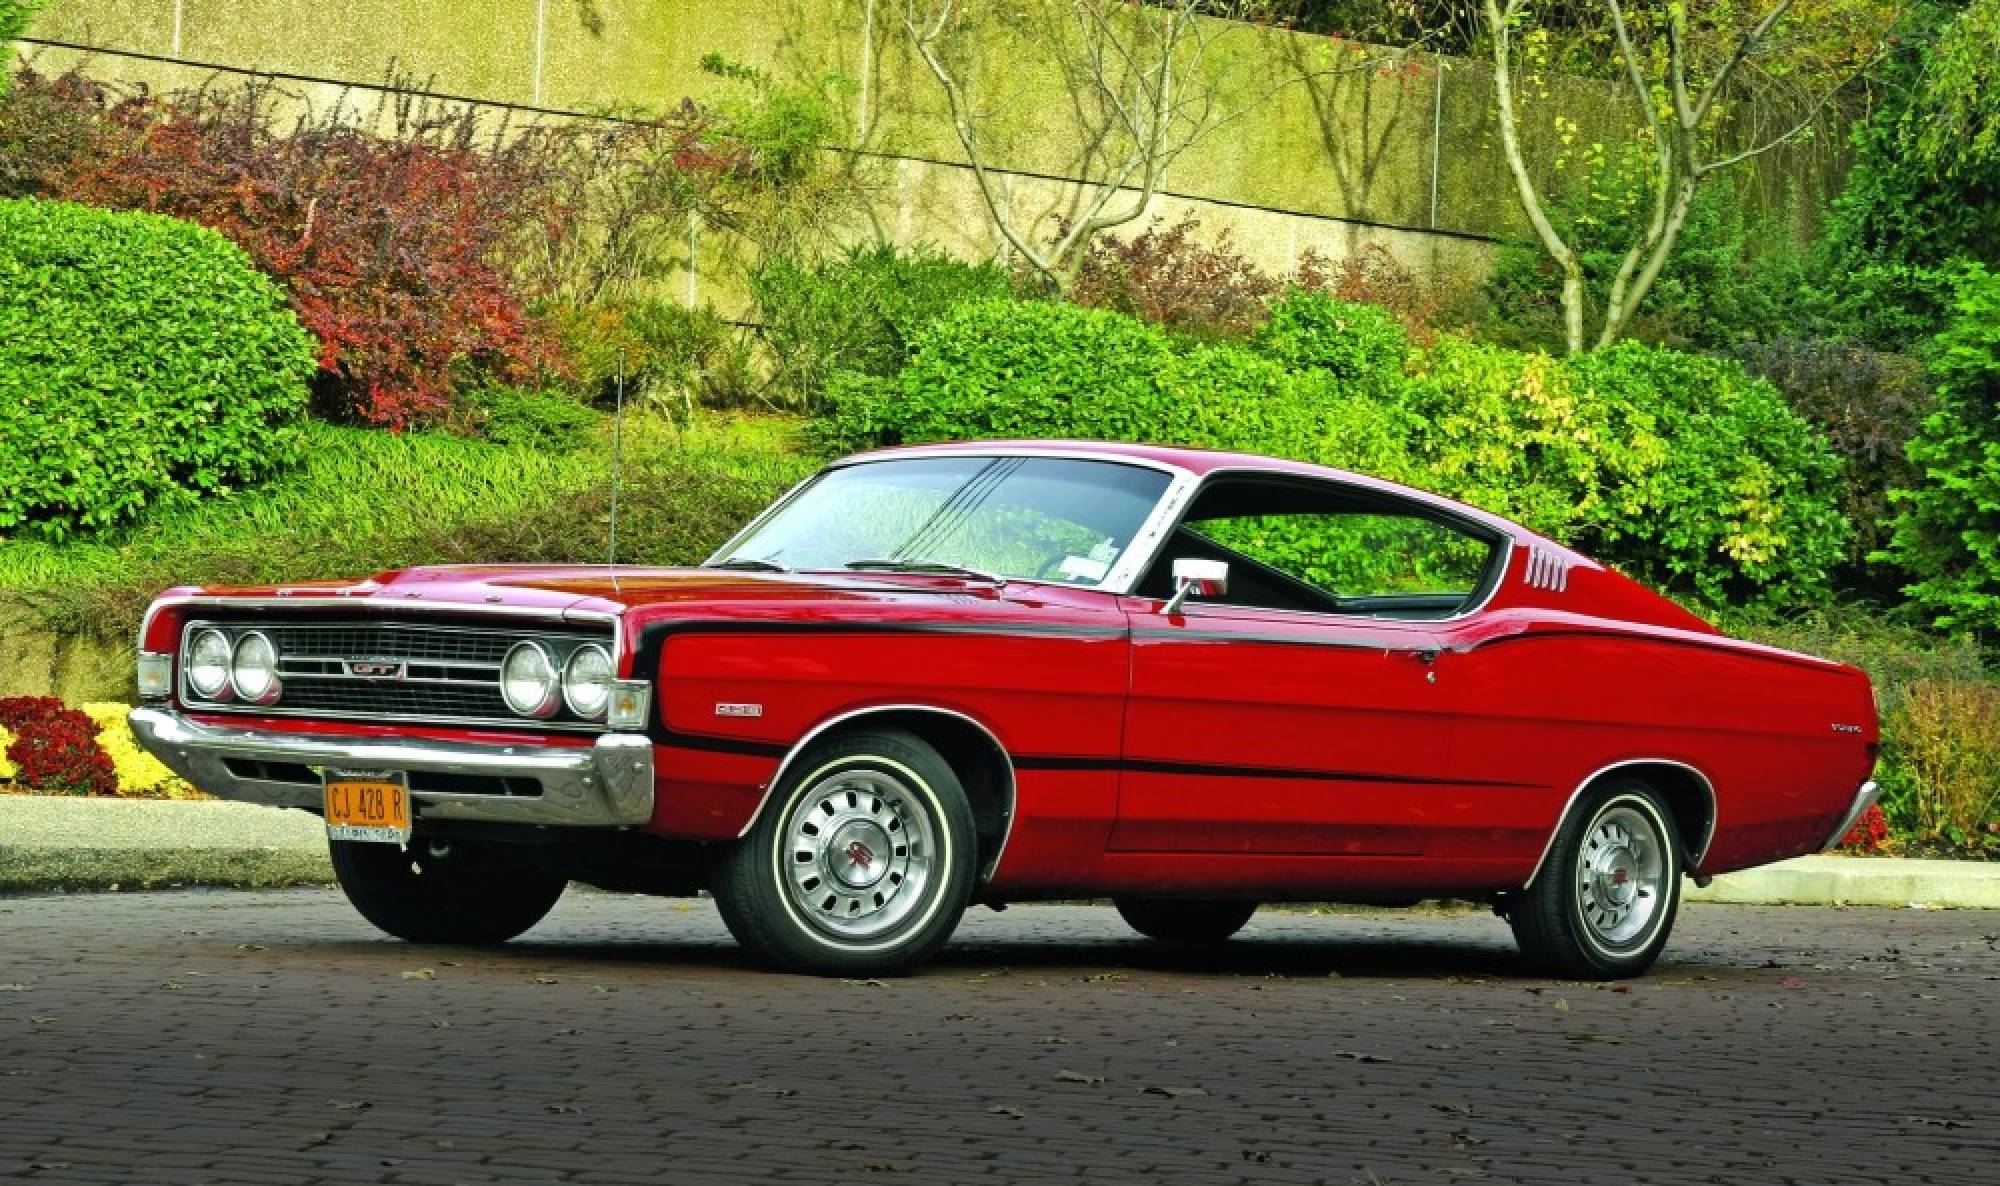 Ford Torino Backgrounds, Compatible - PC, Mobile, Gadgets| 2000x1186 px